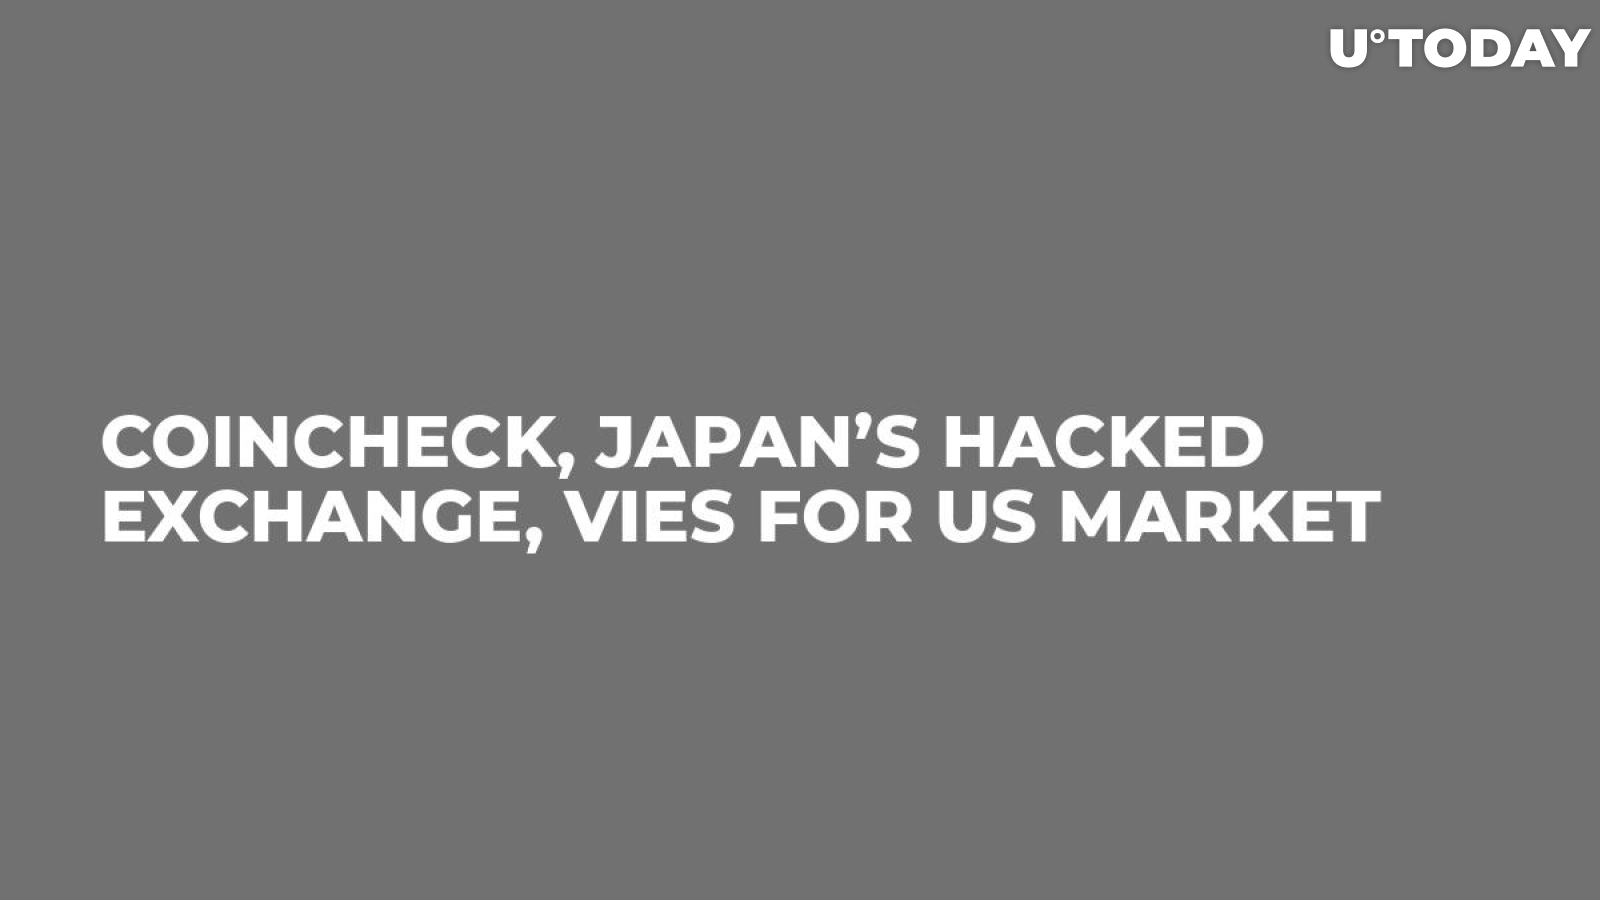 coincheck was hacked for nearly $500 million